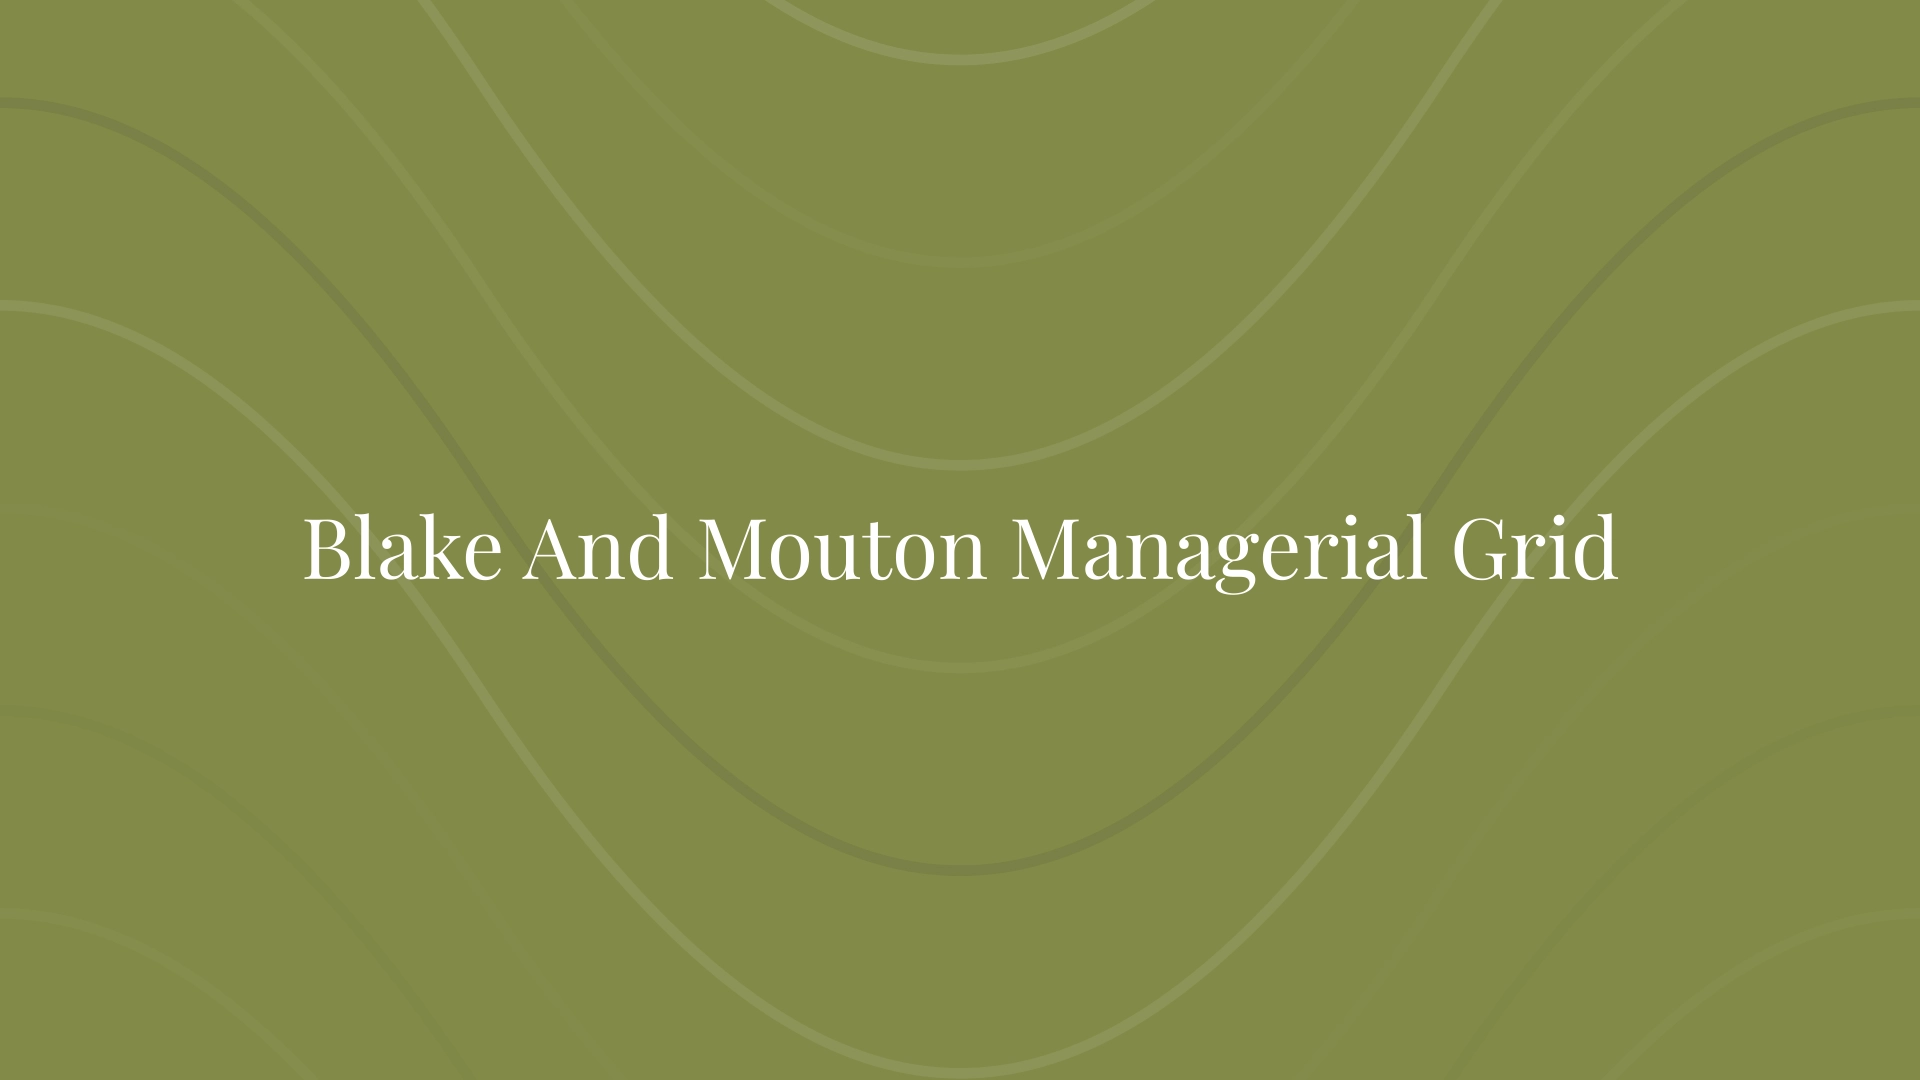 Blake And Mouton Managerial Grid